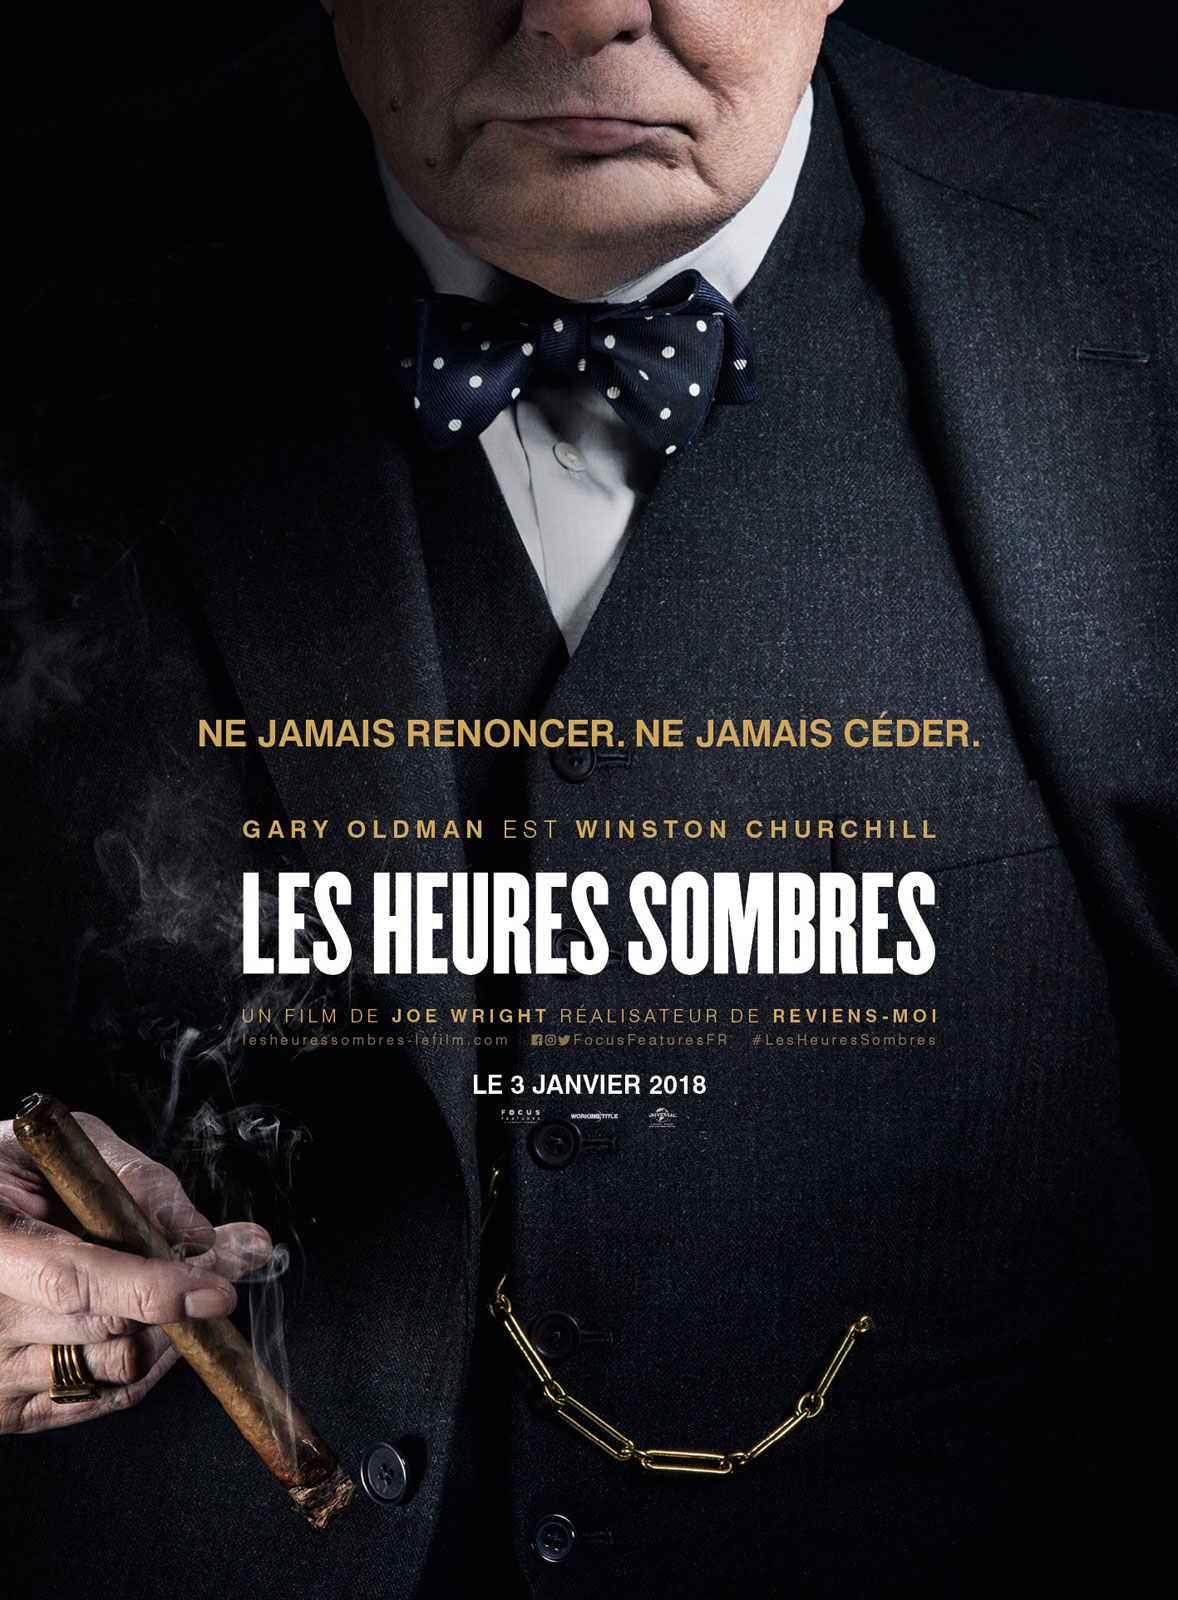 Les heures sombres FRENCH BluRay 720p 2018